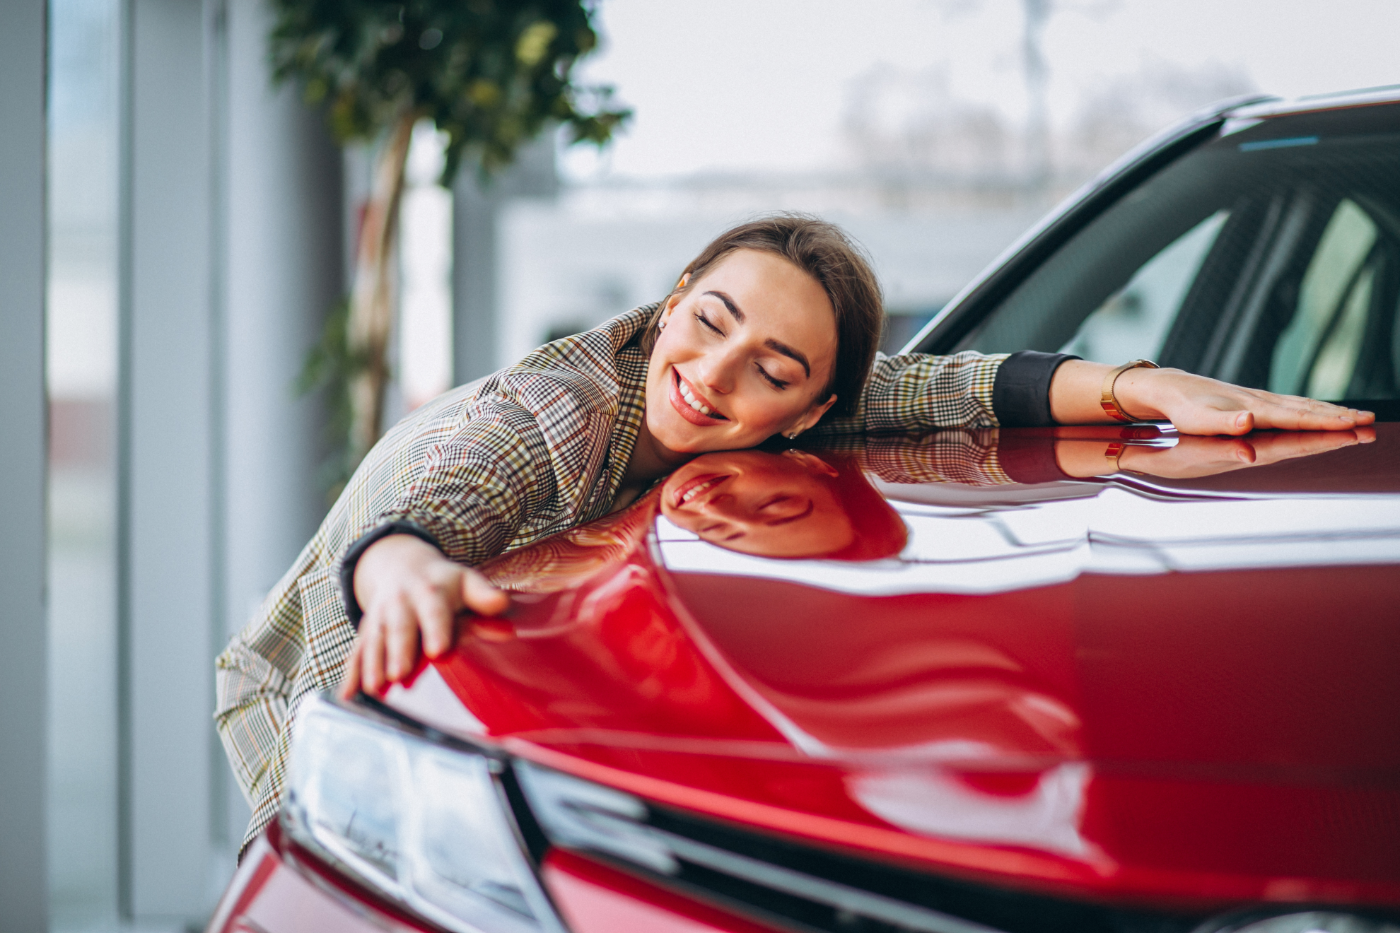 Young woman leaning on the hood of a car